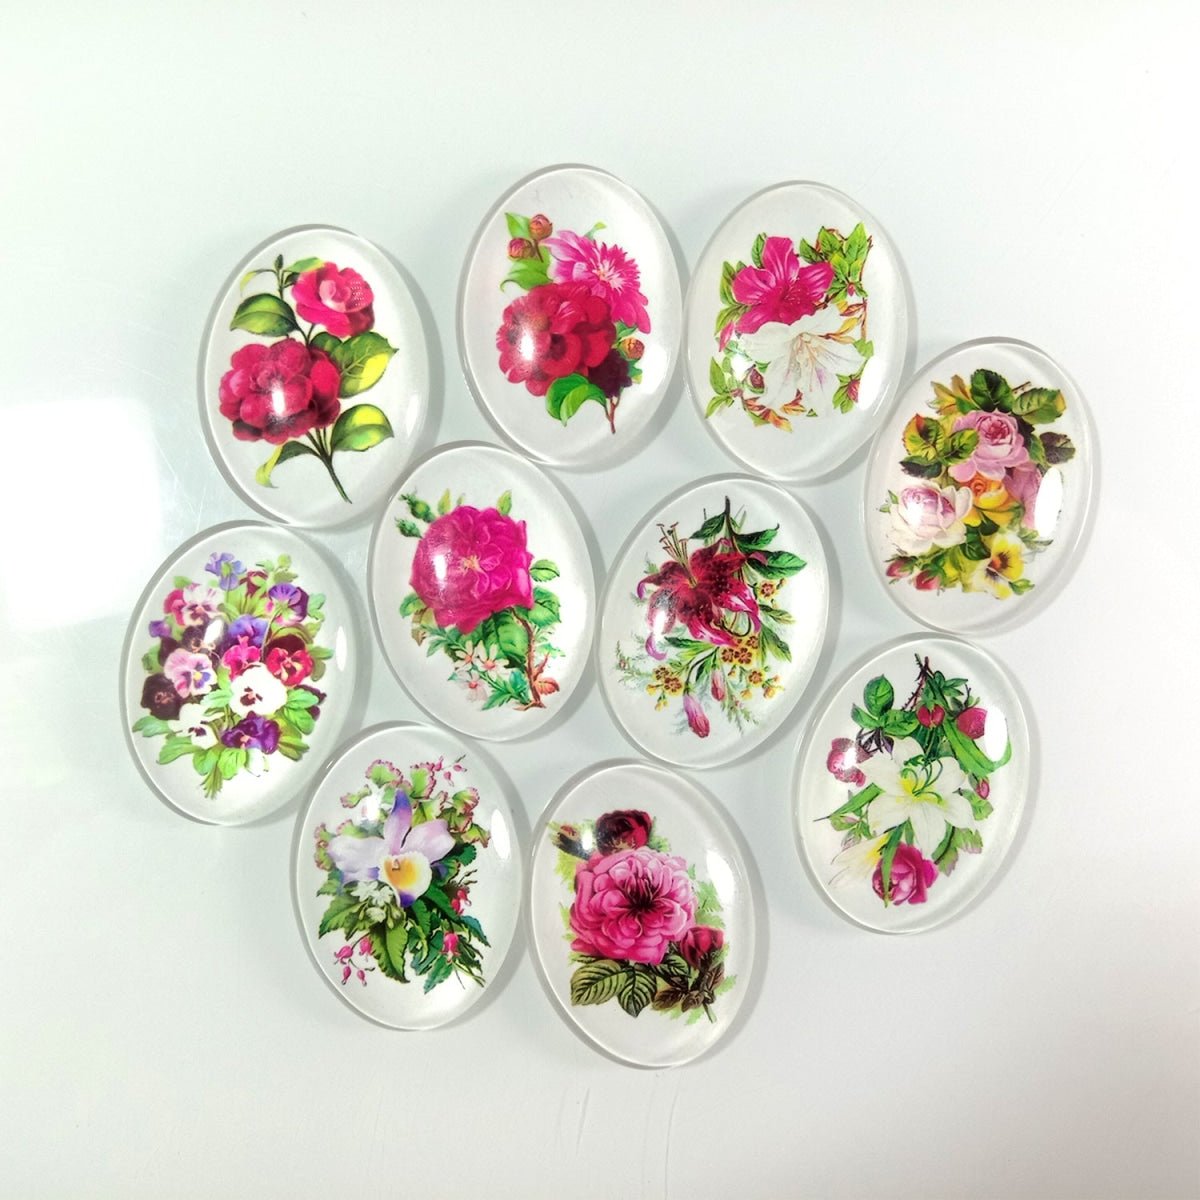 10pcs 13x18mm/18x25mm/30x40mm Oval Photo Glass Cabochon Vintage Flowers Rose Daisy Flat Back - 30x40mm White - - Asia Sell